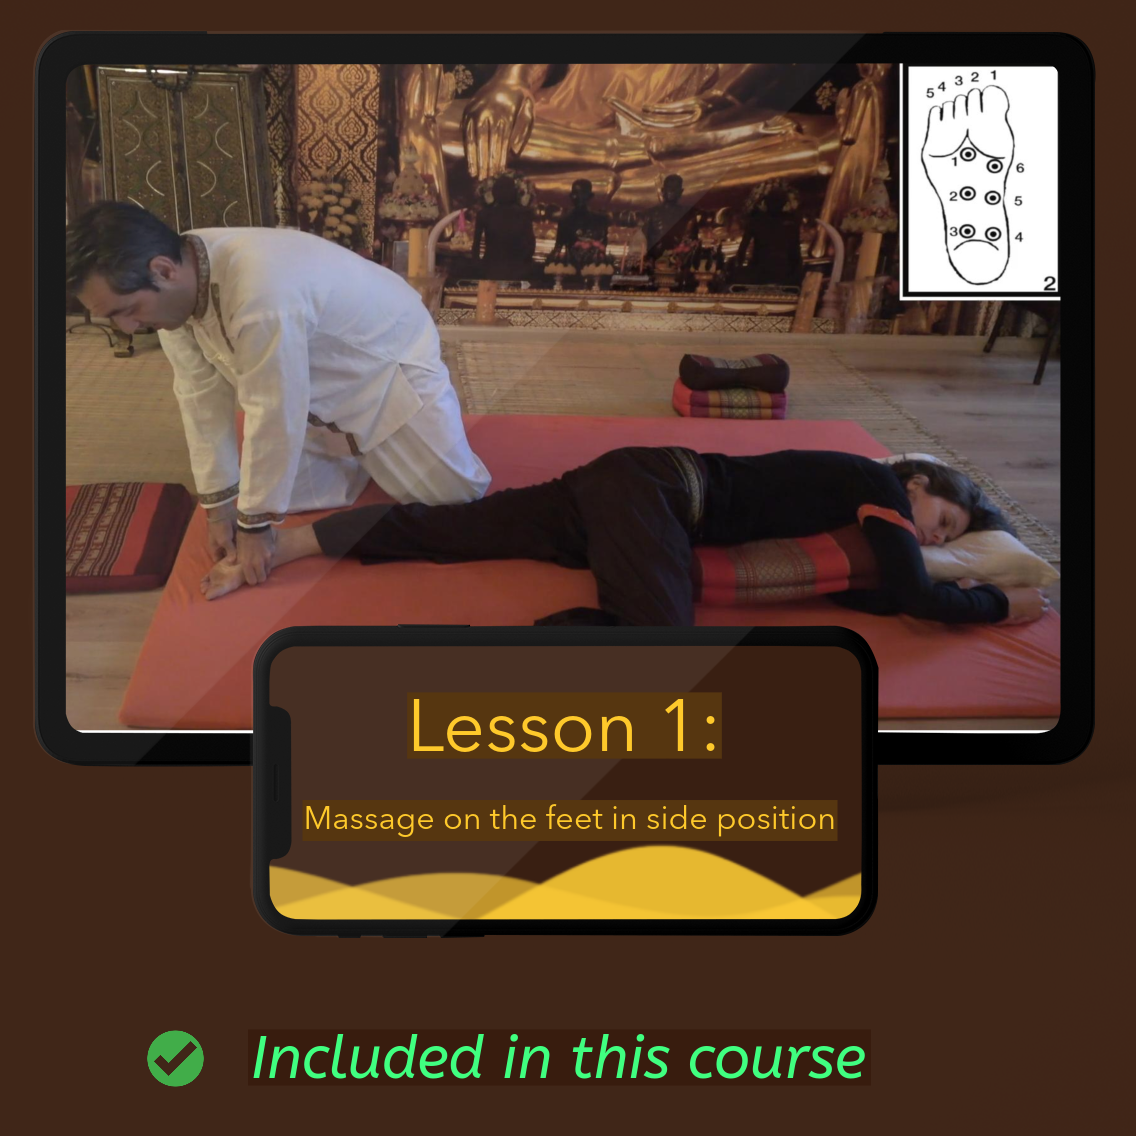 Level 2 - Lesson 1 Massage on the feet in side position